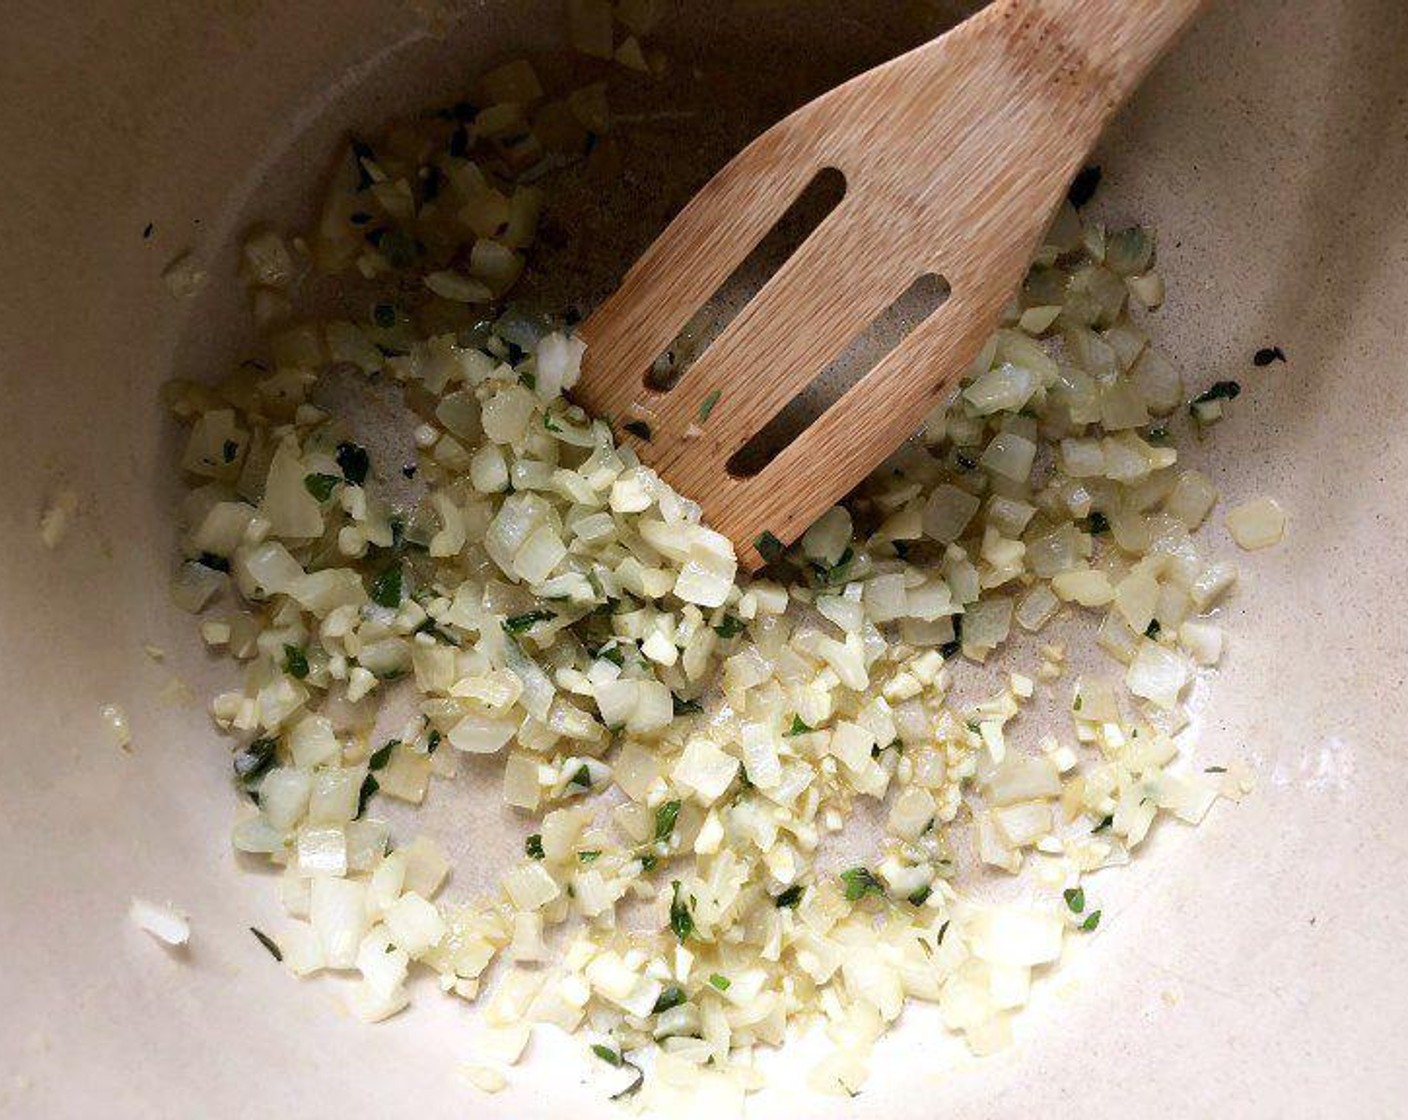 step 2 Add Fresh Oregano (1/2 Tbsp) and Garlic (4 cloves) to the pot. Sauté for 1 more minute.